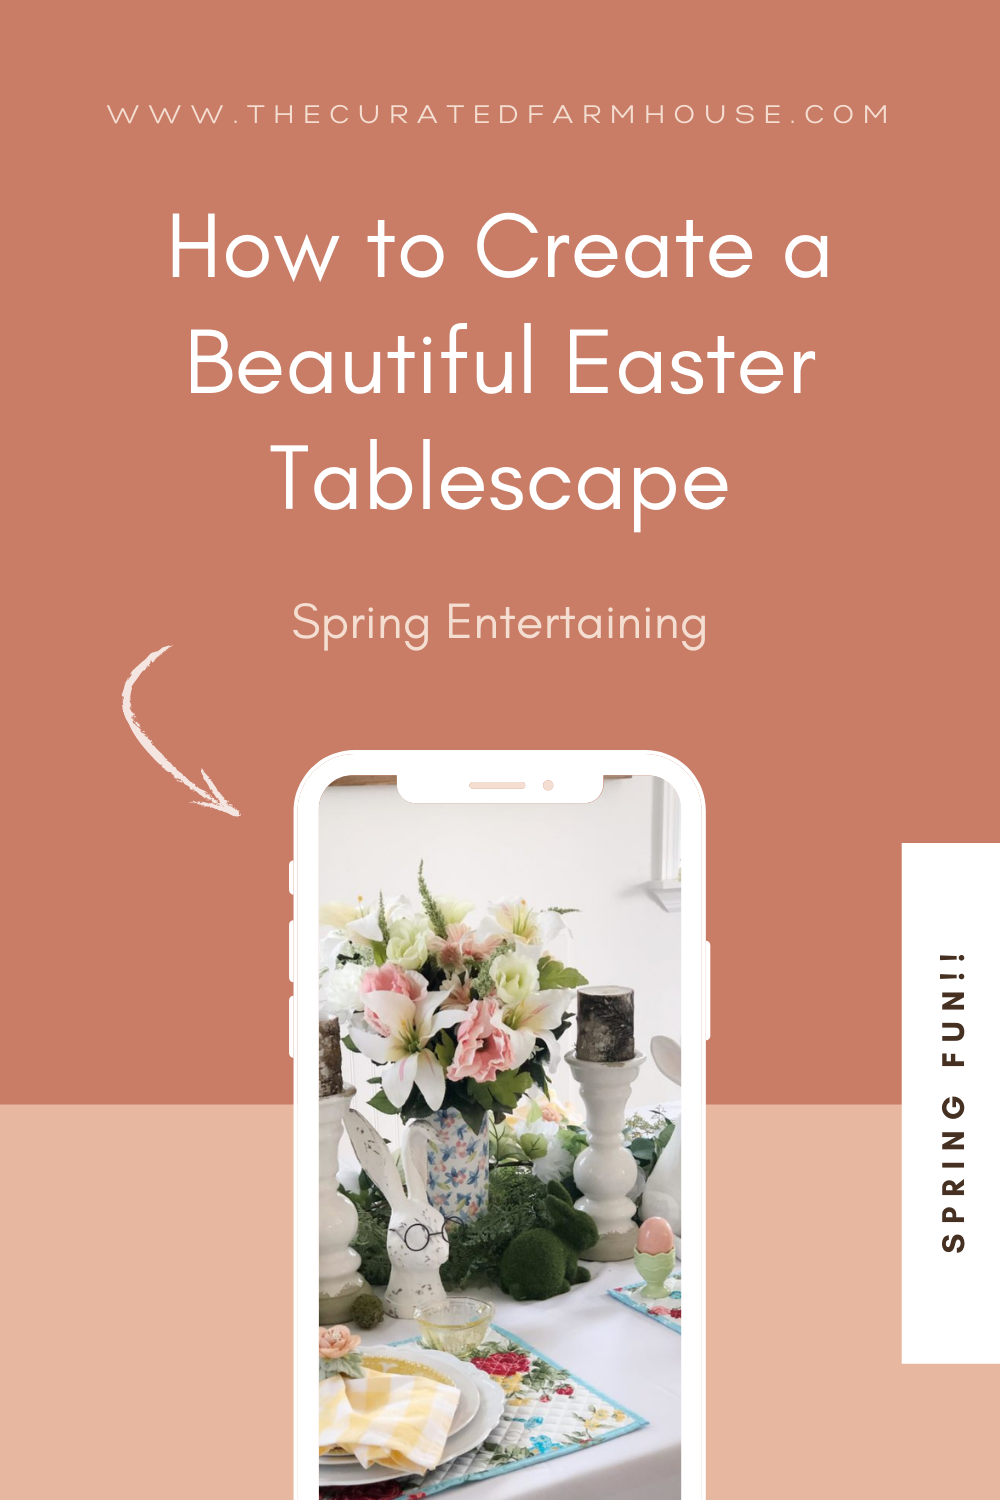 How to Create a Beautiful Easter Tablescape